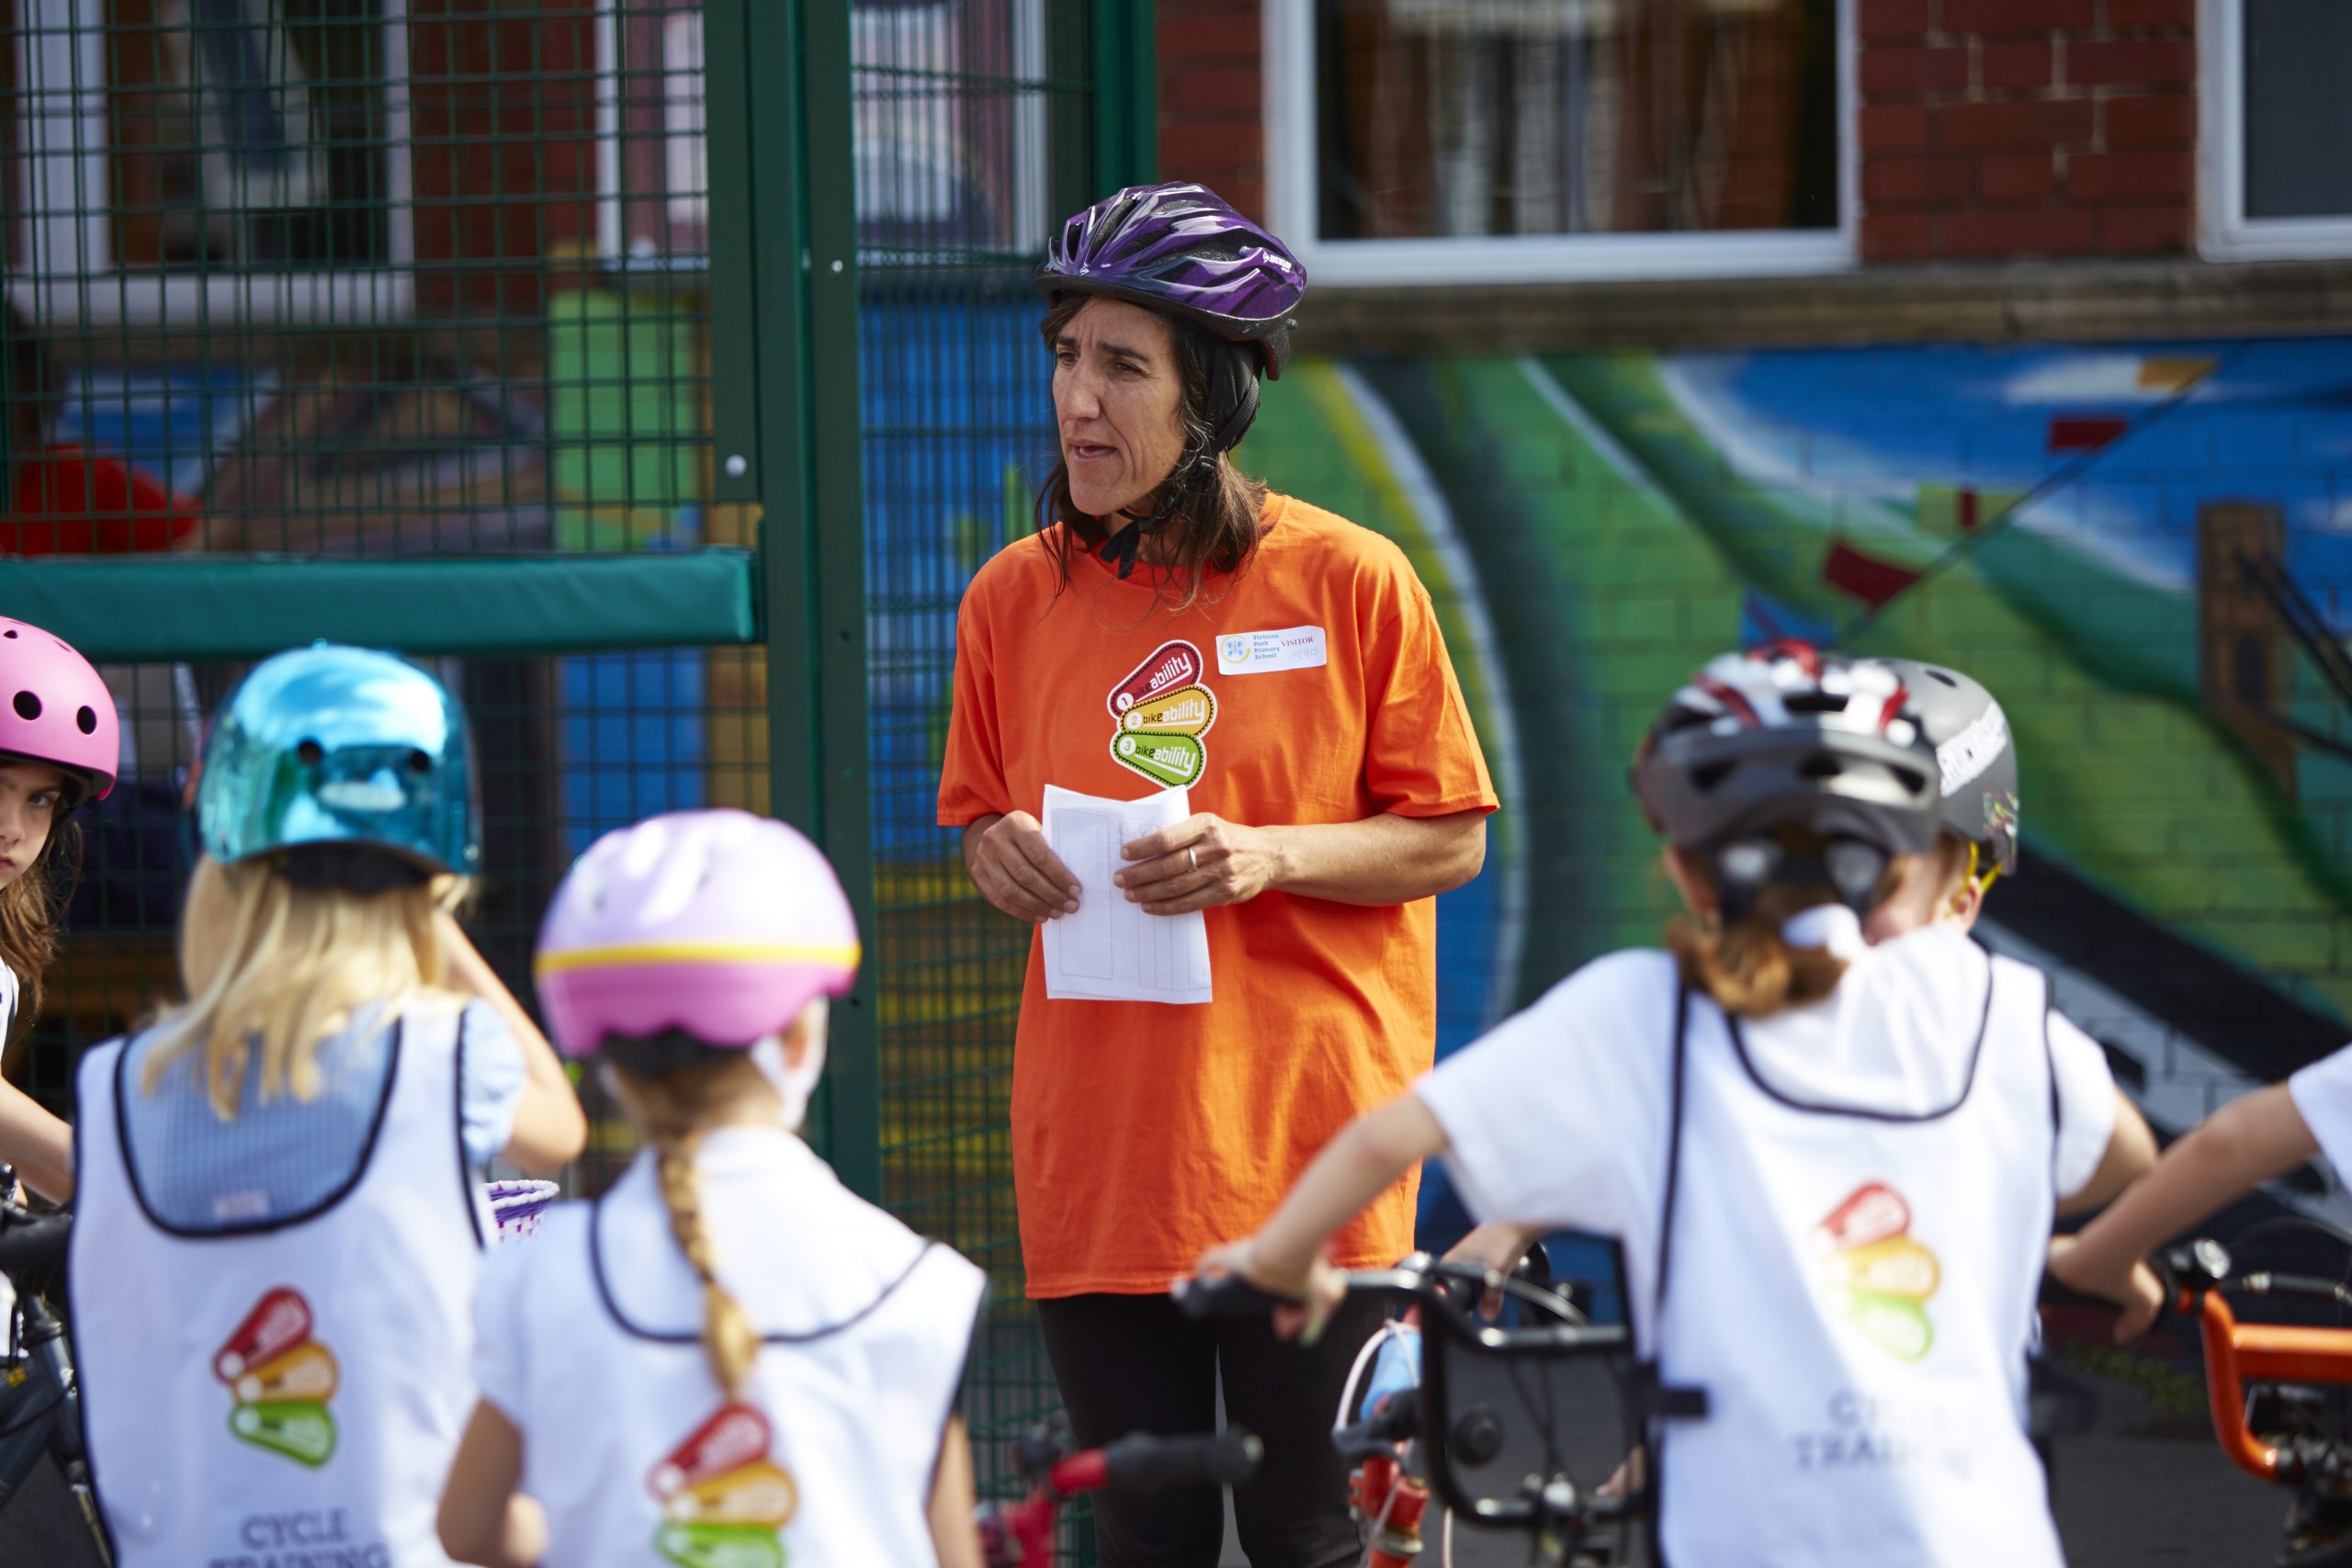 A bikeability instructor surrounded by four students on their bikes